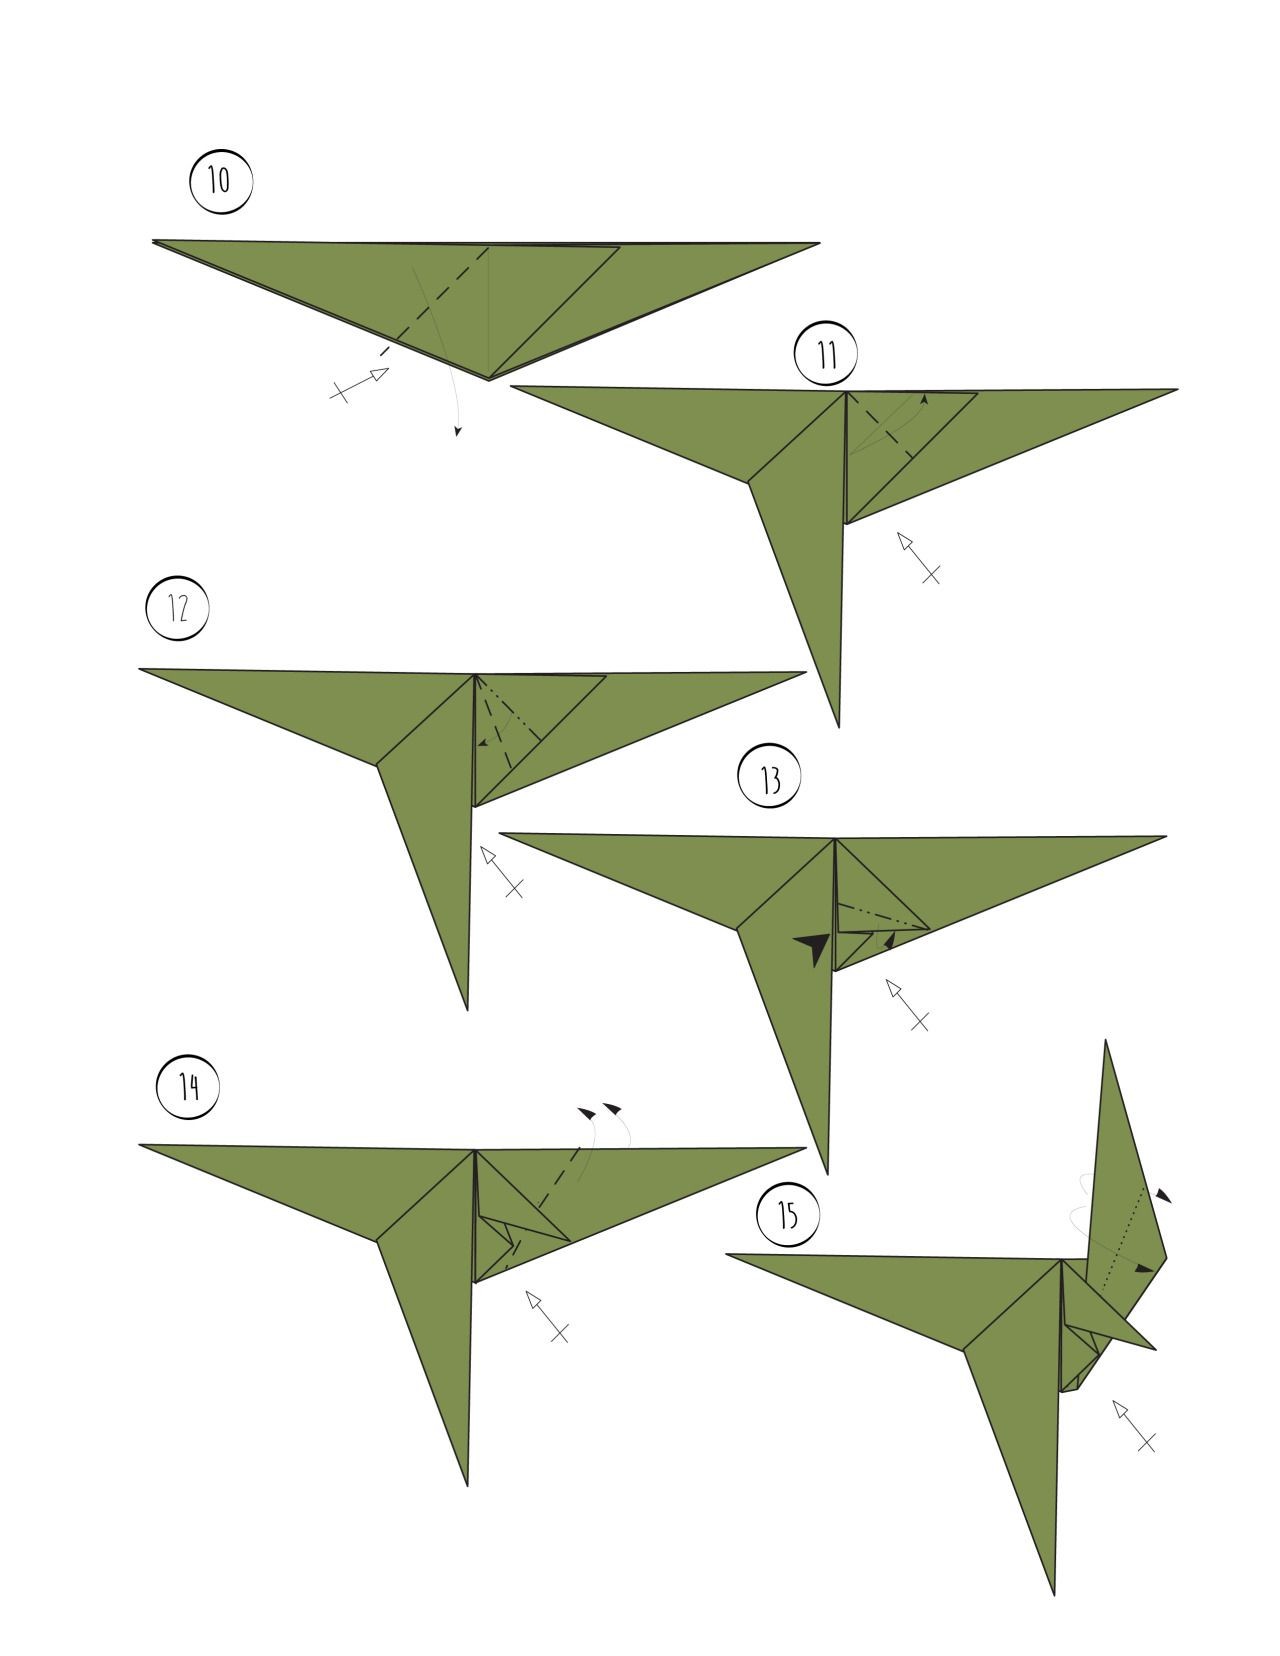 Dinosaur Papercraft Wikihow — Rawr origami Dinosaur and 2 More Ways to Make